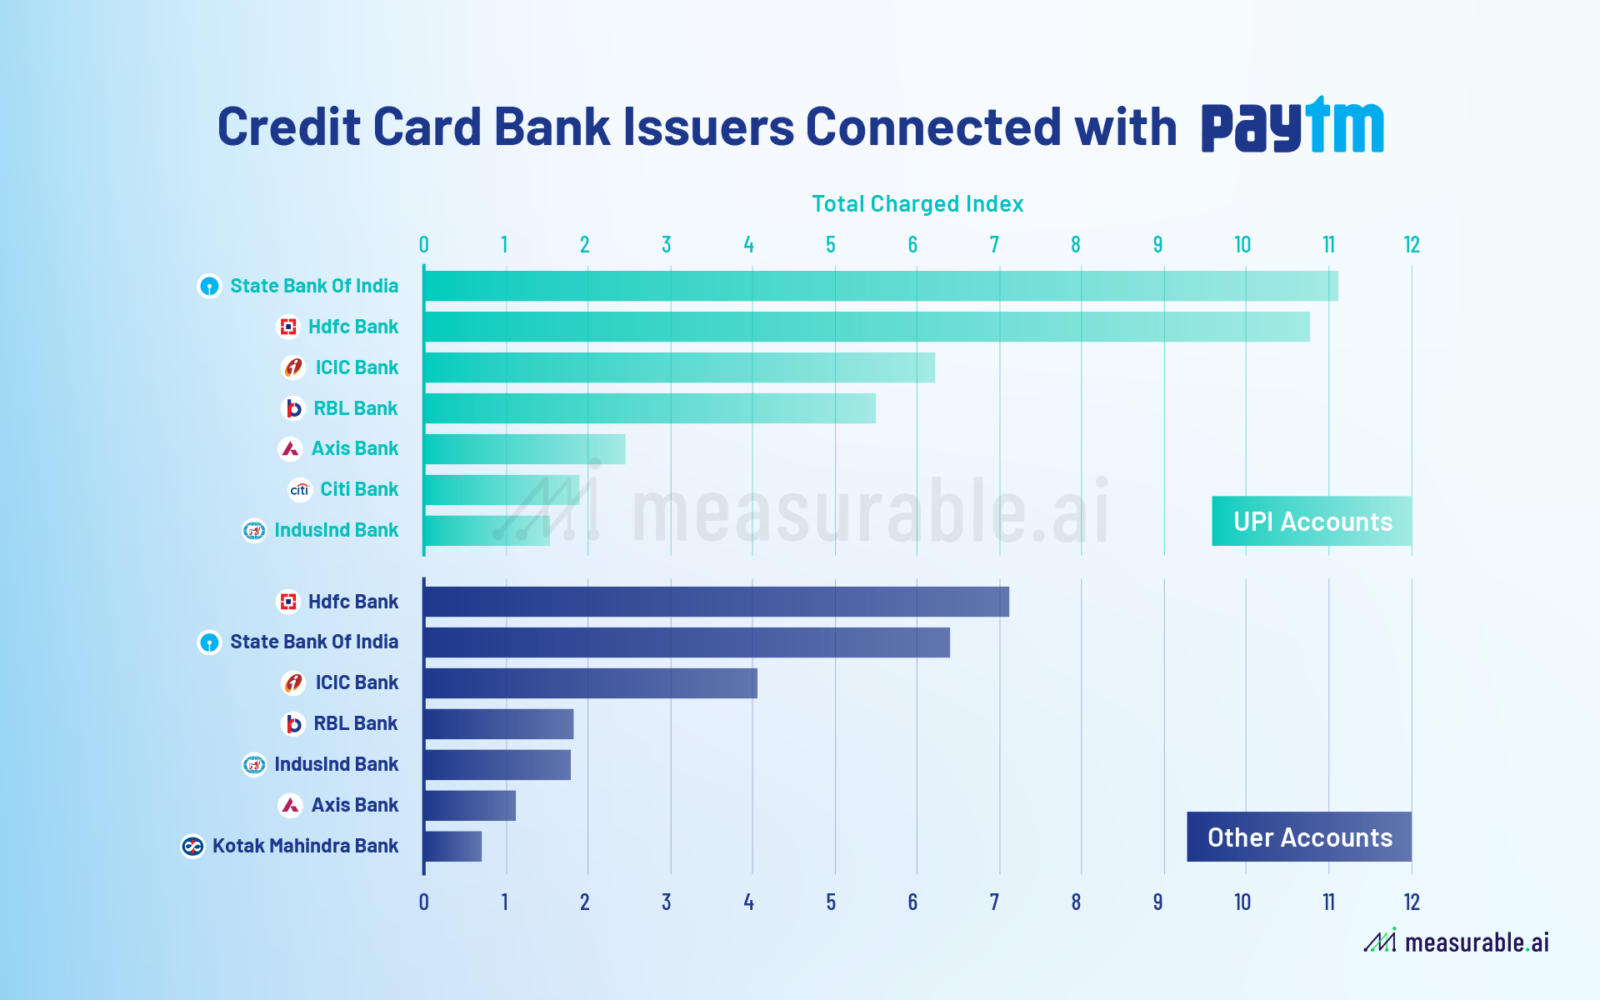 Credit card issuers connected with PayTM